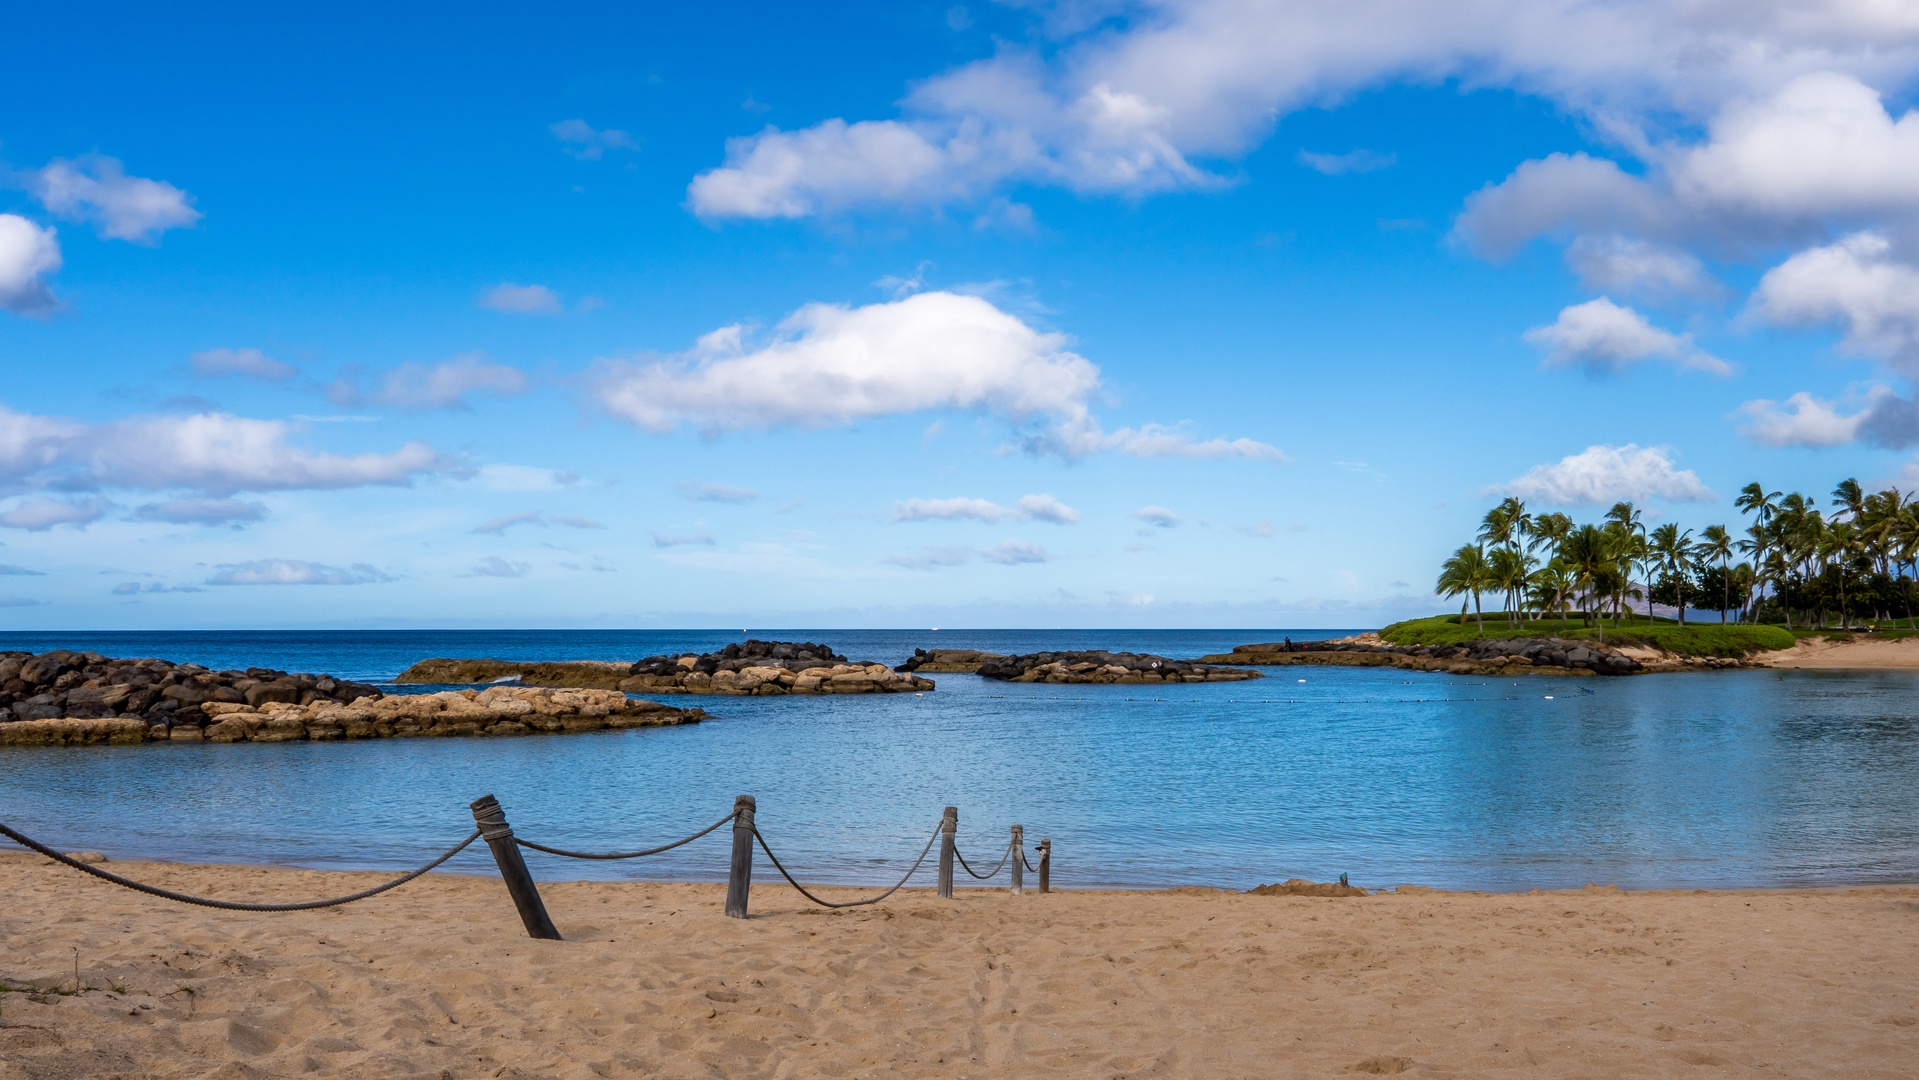 Kapolei Vacation Rentals, Fairways at Ko Olina 4A - Take a stroll along the peaceful shores in paradise.